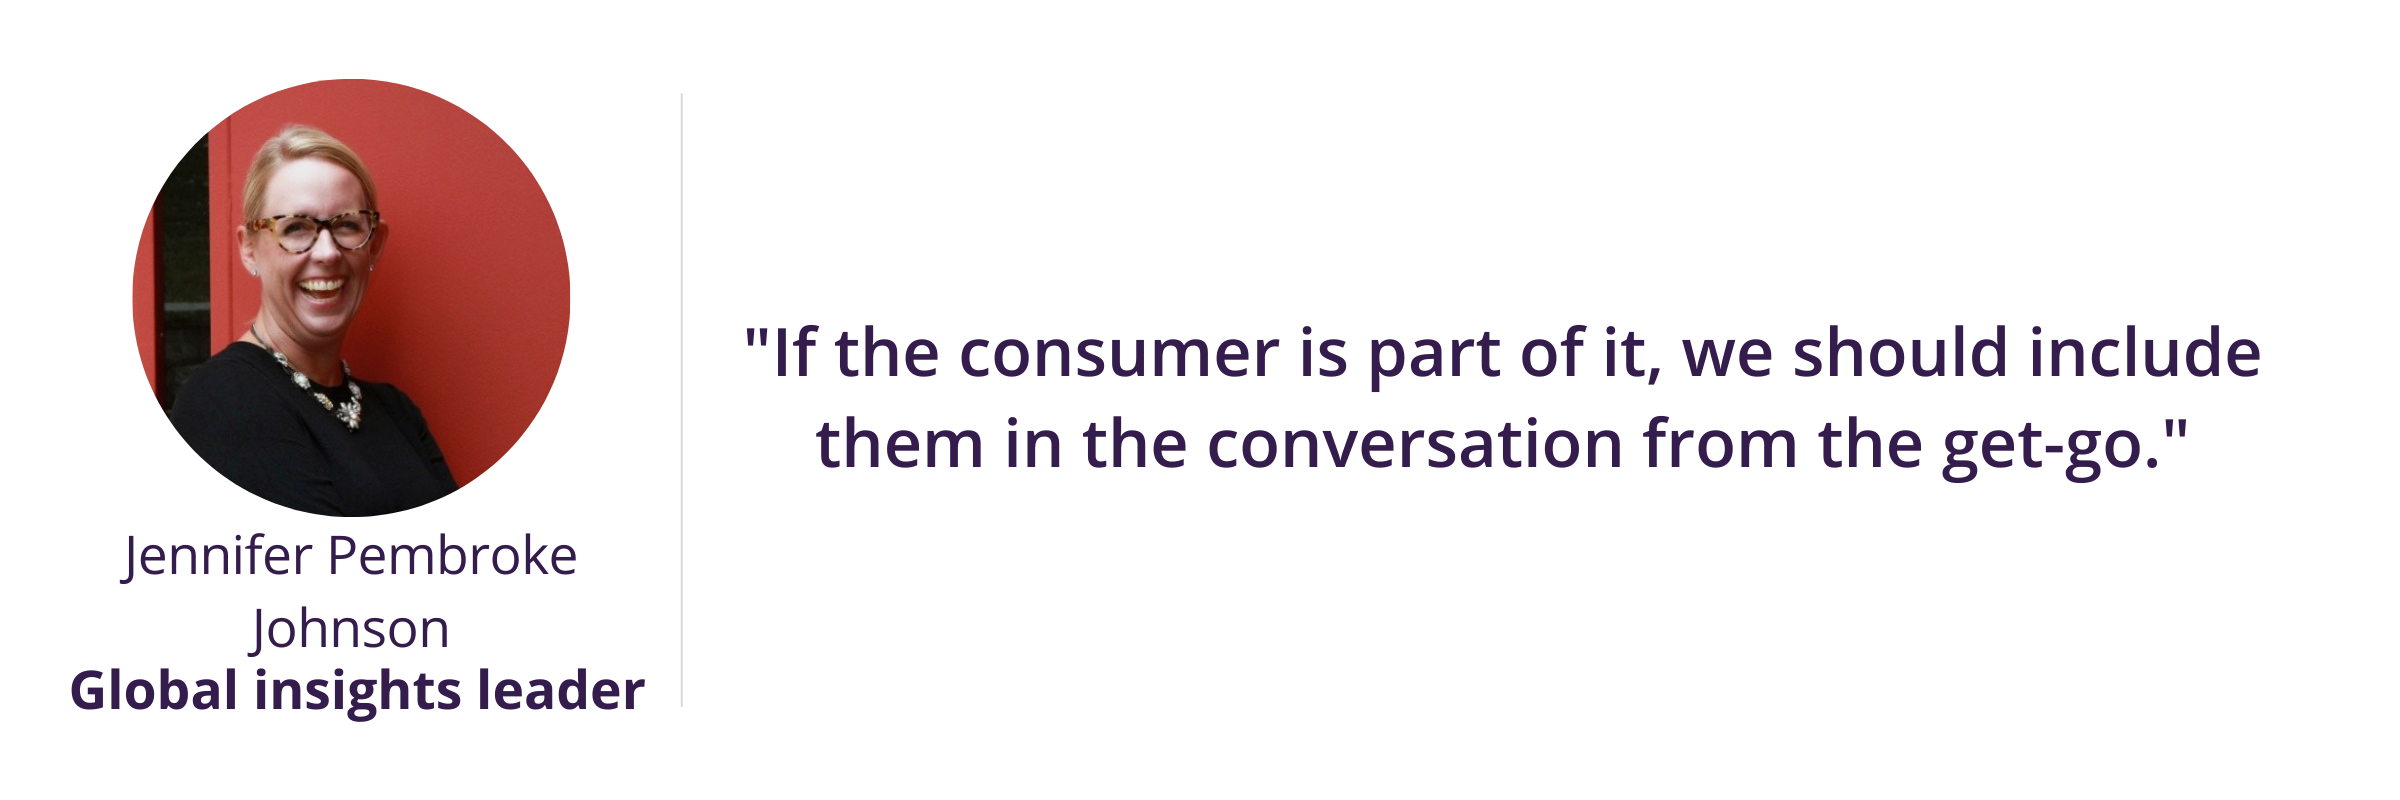 Consumer-first culture "If the consumer is part of it, we should include them in the conversation from the get-go."